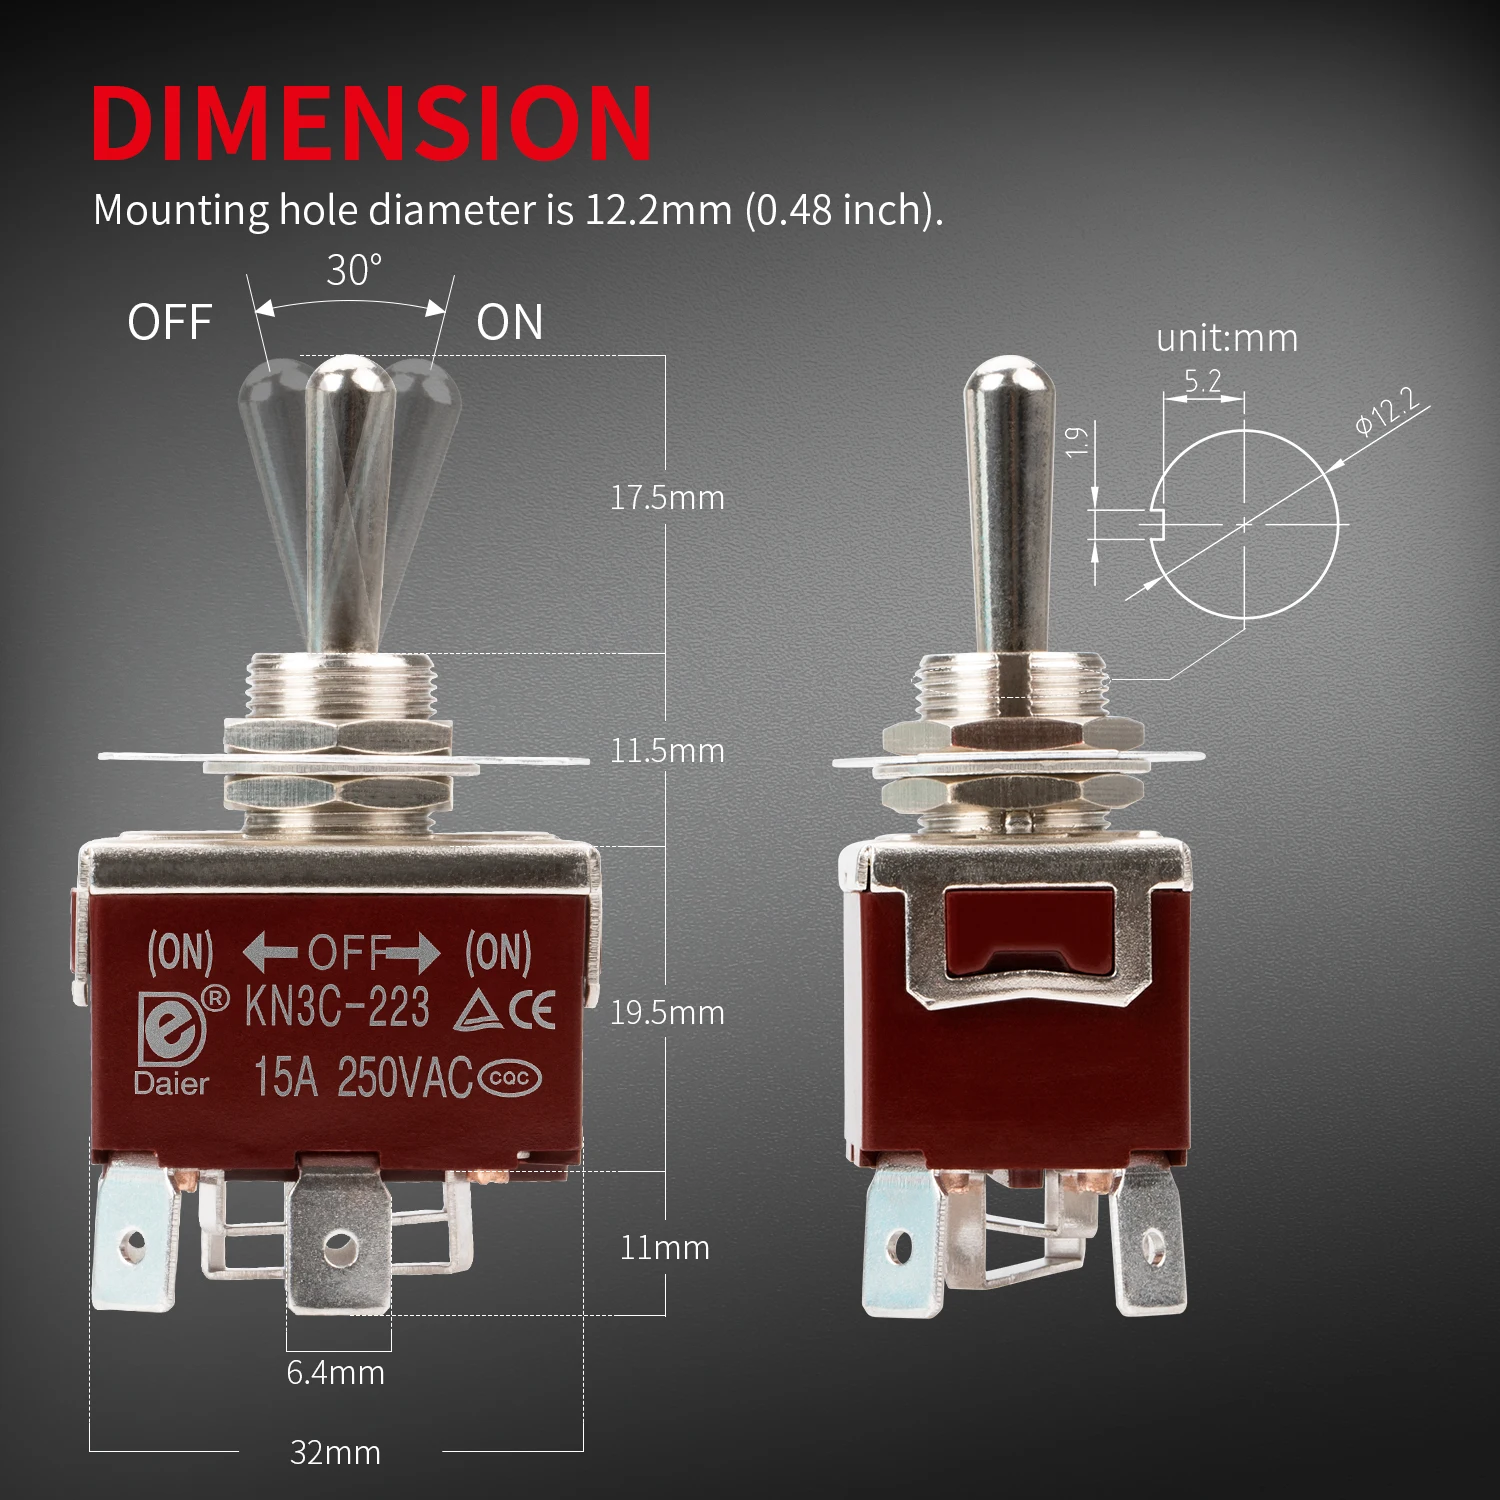 Daiertek KN3C-223AAP 4 Pin (ON)-OFF-(ON) Momentary DC Automatic Motor Control Polarity Reverse Toggle Switch